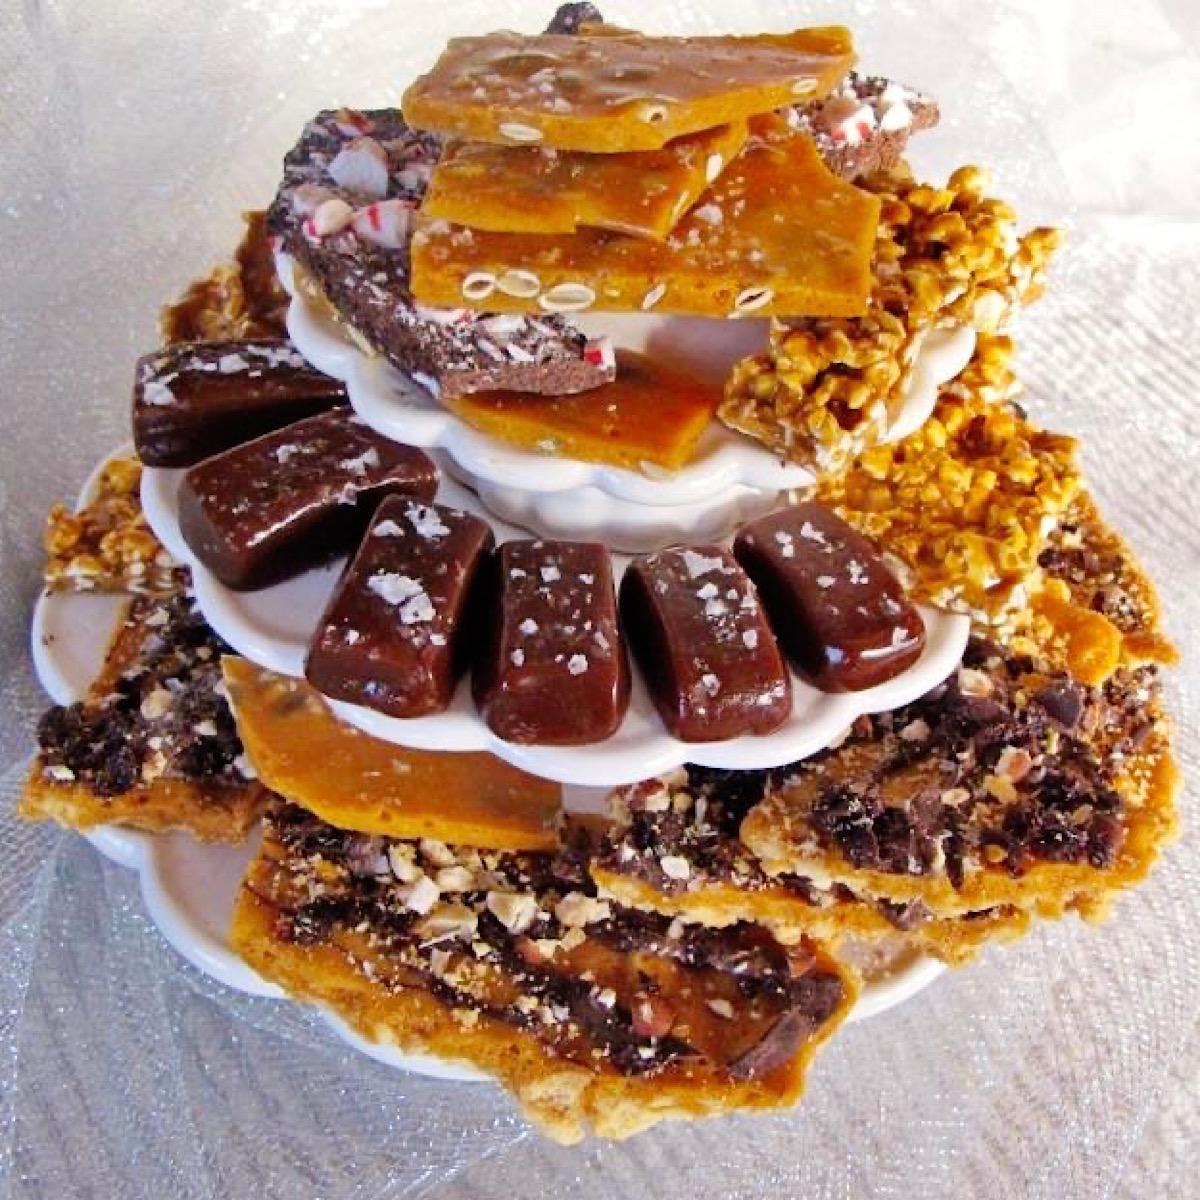 Peanut brittle, chocolate bark and bourbon caramels on a tiered candy dish